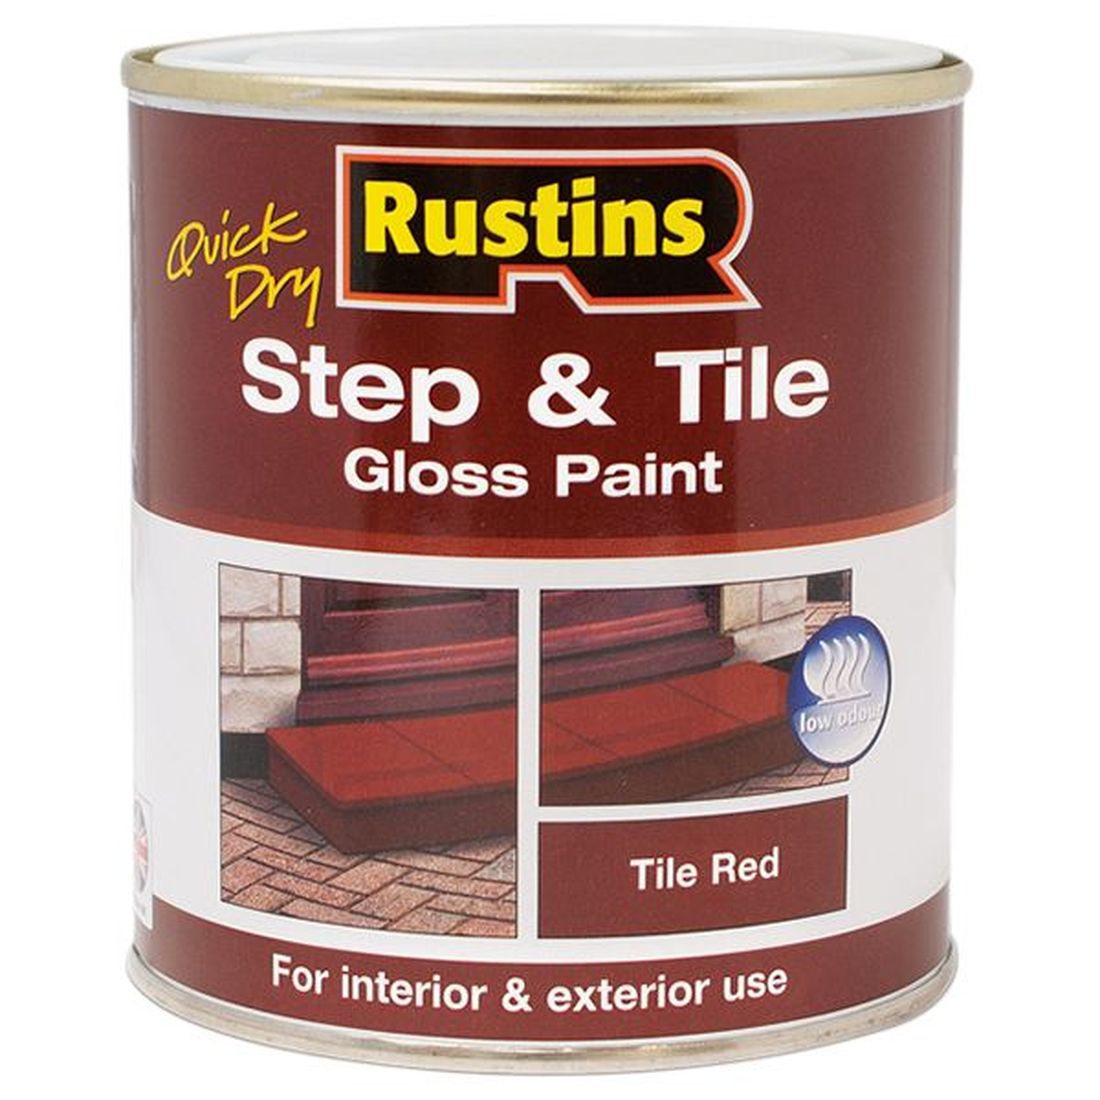 Rustins Quick Dry Step & Tile Paint Gloss Red 2.5 litre                                 